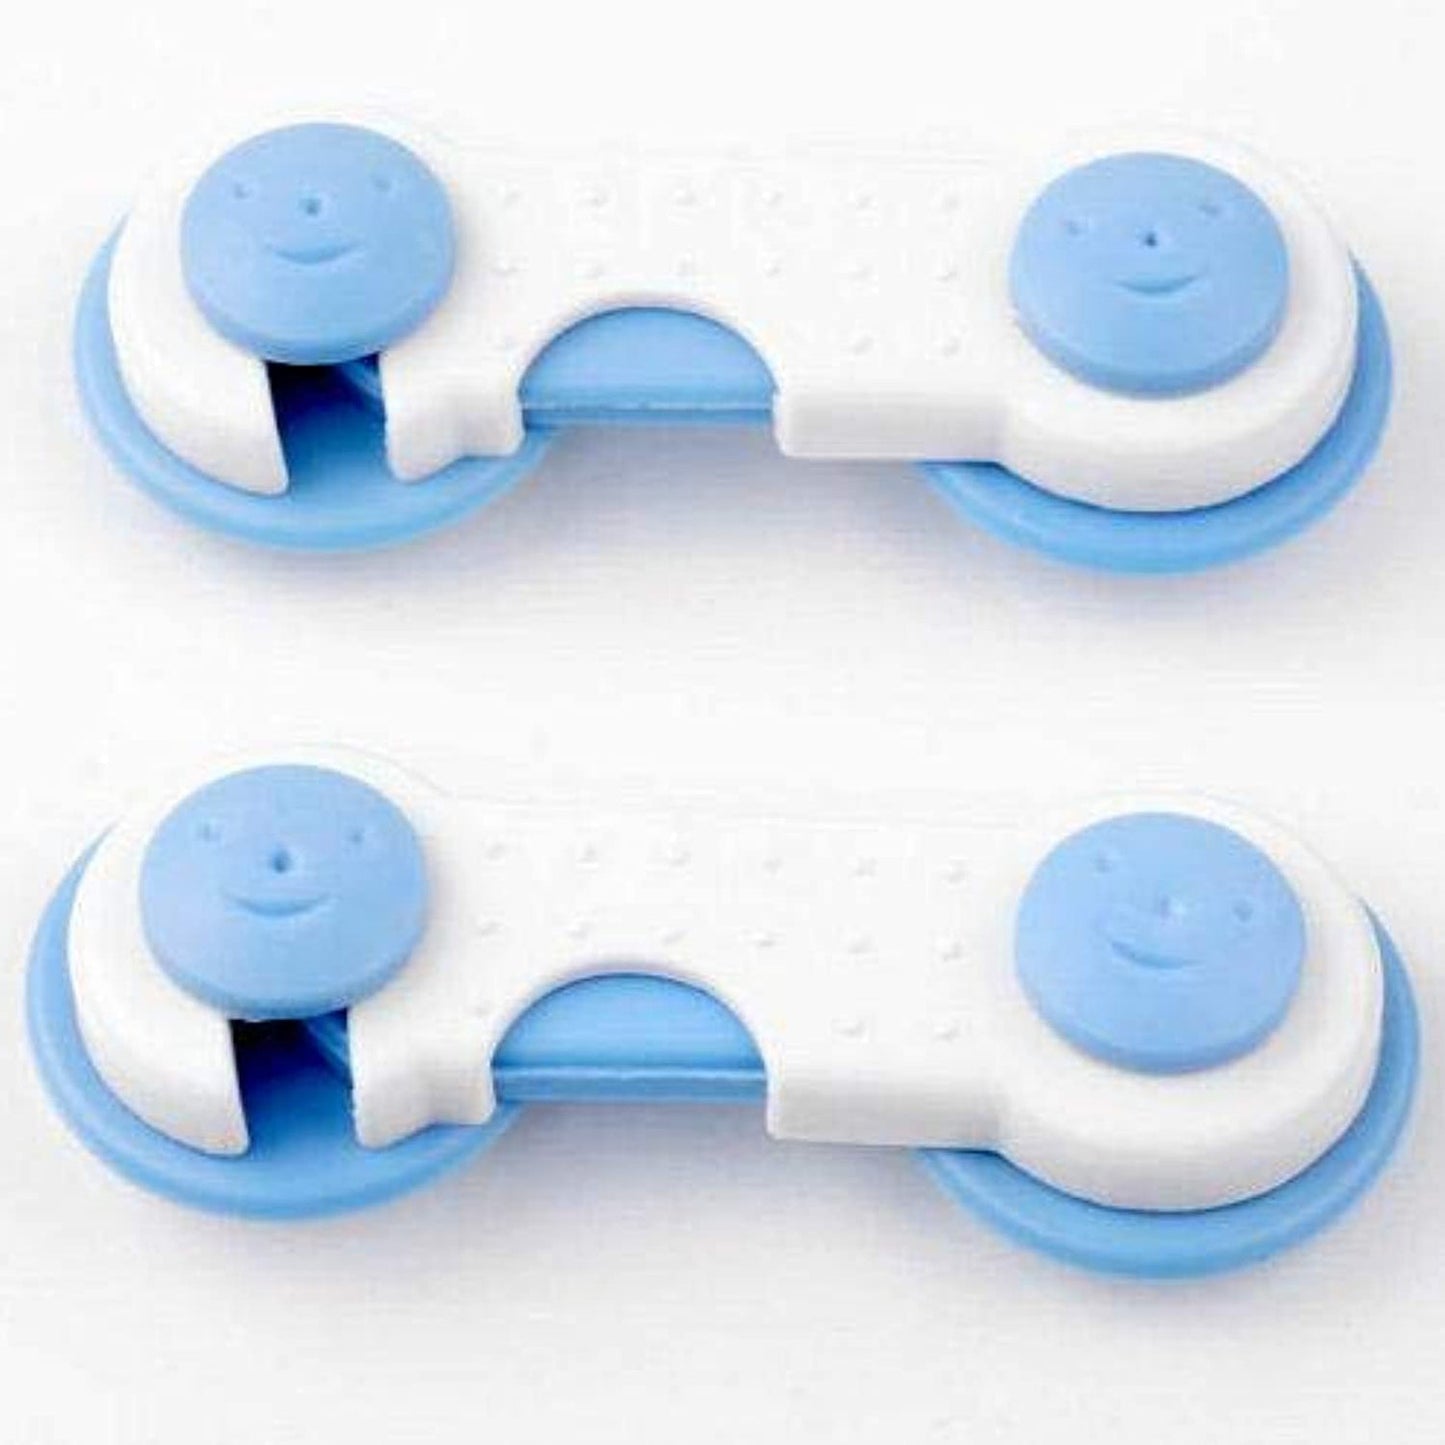 4688A Child Safety lock Child Toddler Baby Safety Locks Proofing for Cabinet Toilet Seat Fridge Door Drawers ( 1 pc) Dukandaily